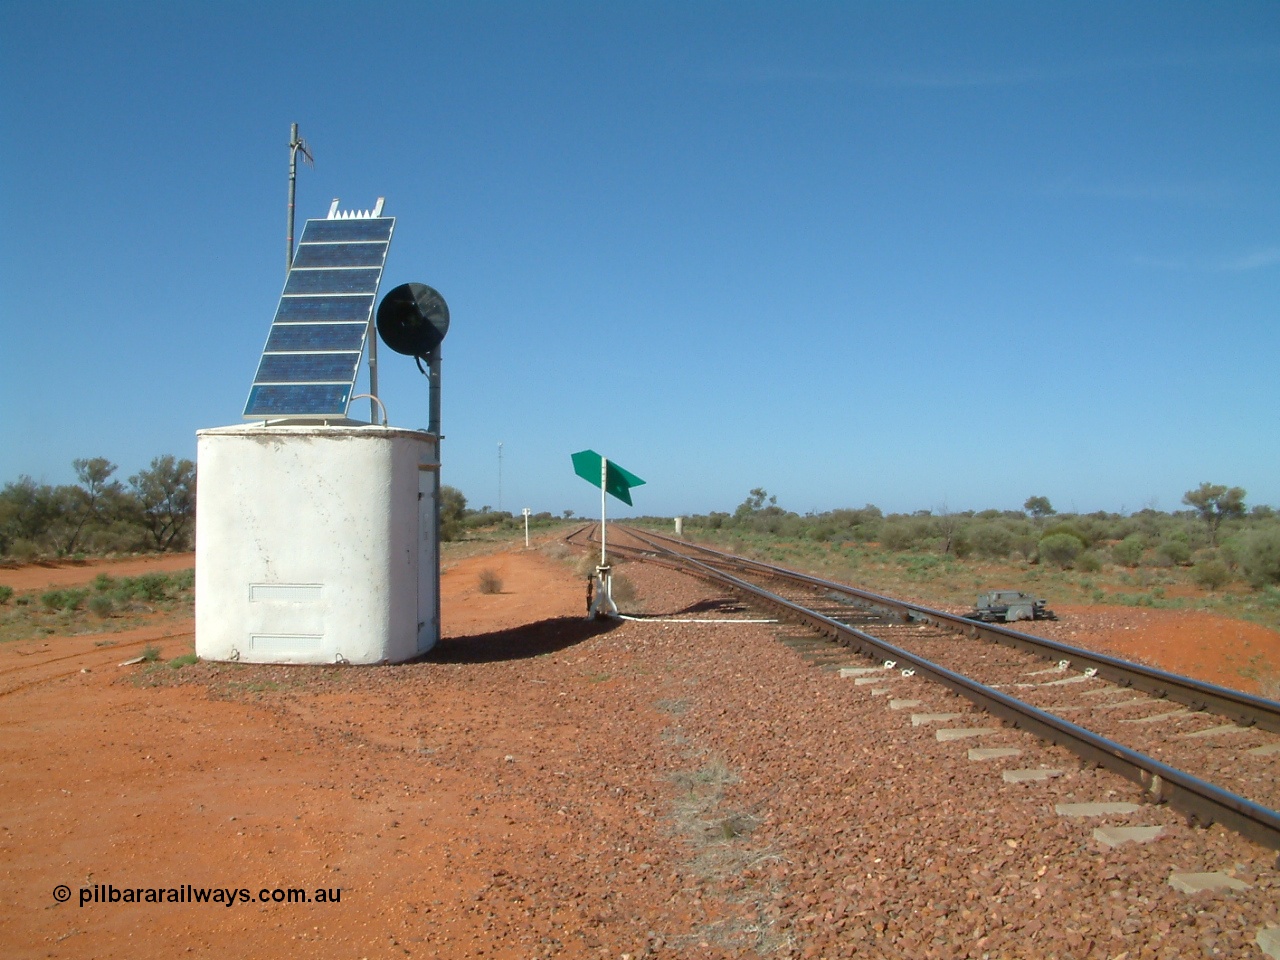 030416 095502
Wirrida Siding, looking south towards Tarcoola from the north end of the loop, concrete interlocking hut with searchlight repeater signal, point indicator, communications tower in the distance on the left and train control 'pillbox' on the right. Located at the 641 km from the 0 datum at Coonamia and 137 km north of Tarcoola between Carnes and Manguri on the Tarcoola - Alice Springs line. [url=https://goo.gl/maps/corZKNsBFkCGAnkR8]GeoData location[/url]. 16th April 2003.
